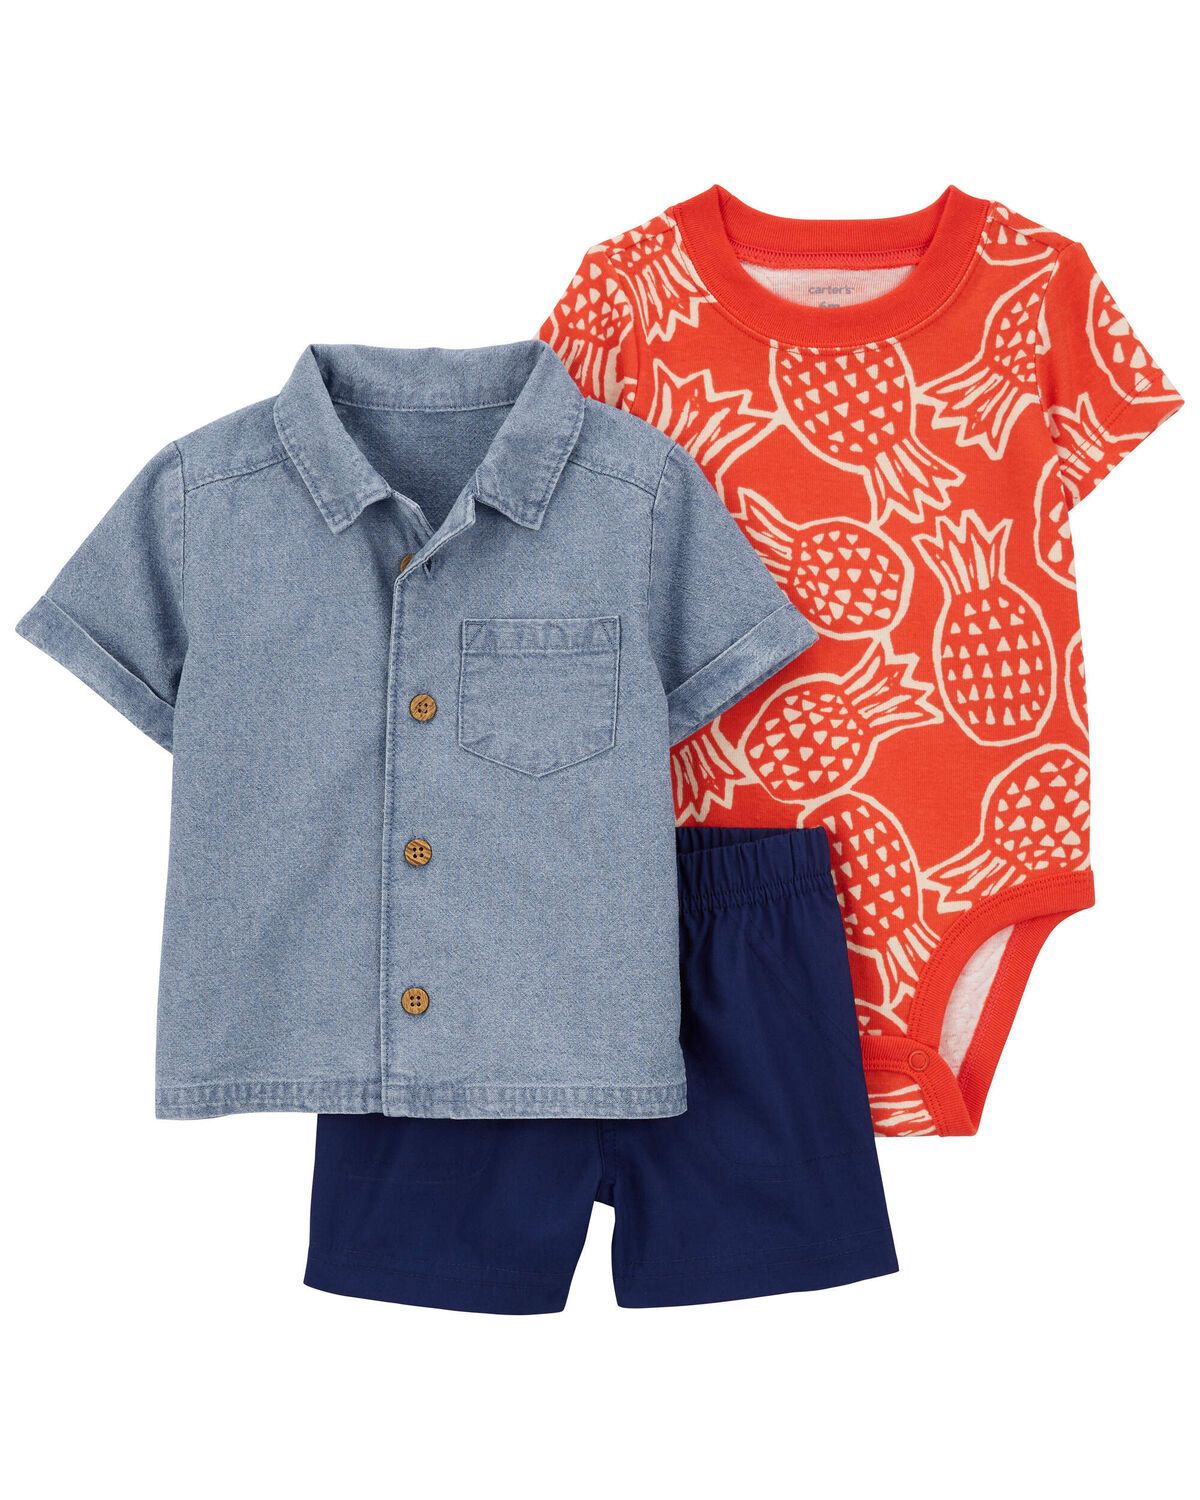 Red/Chambray Baby 3-Piece Pineapple Little Short Set | carters.com | Carter's